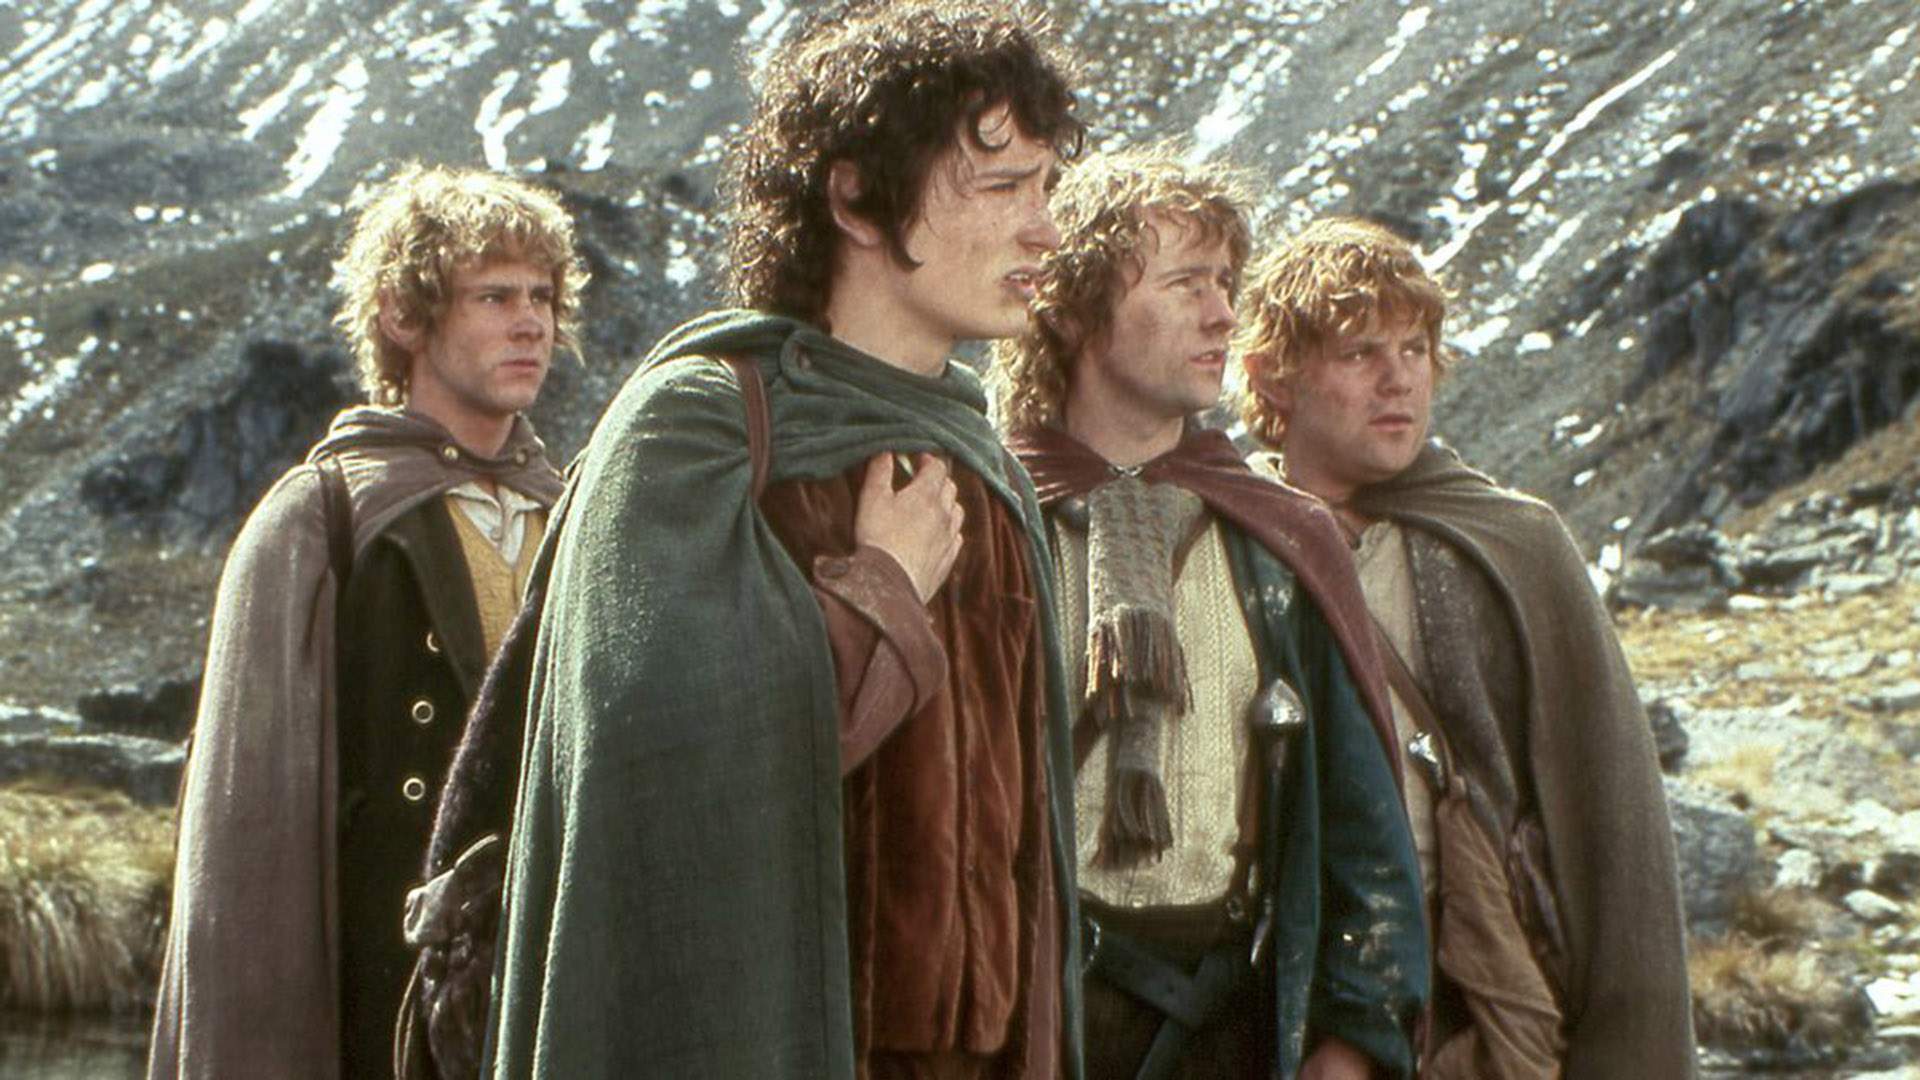 'The Lord of the Rings' Marathon — Extended Edition